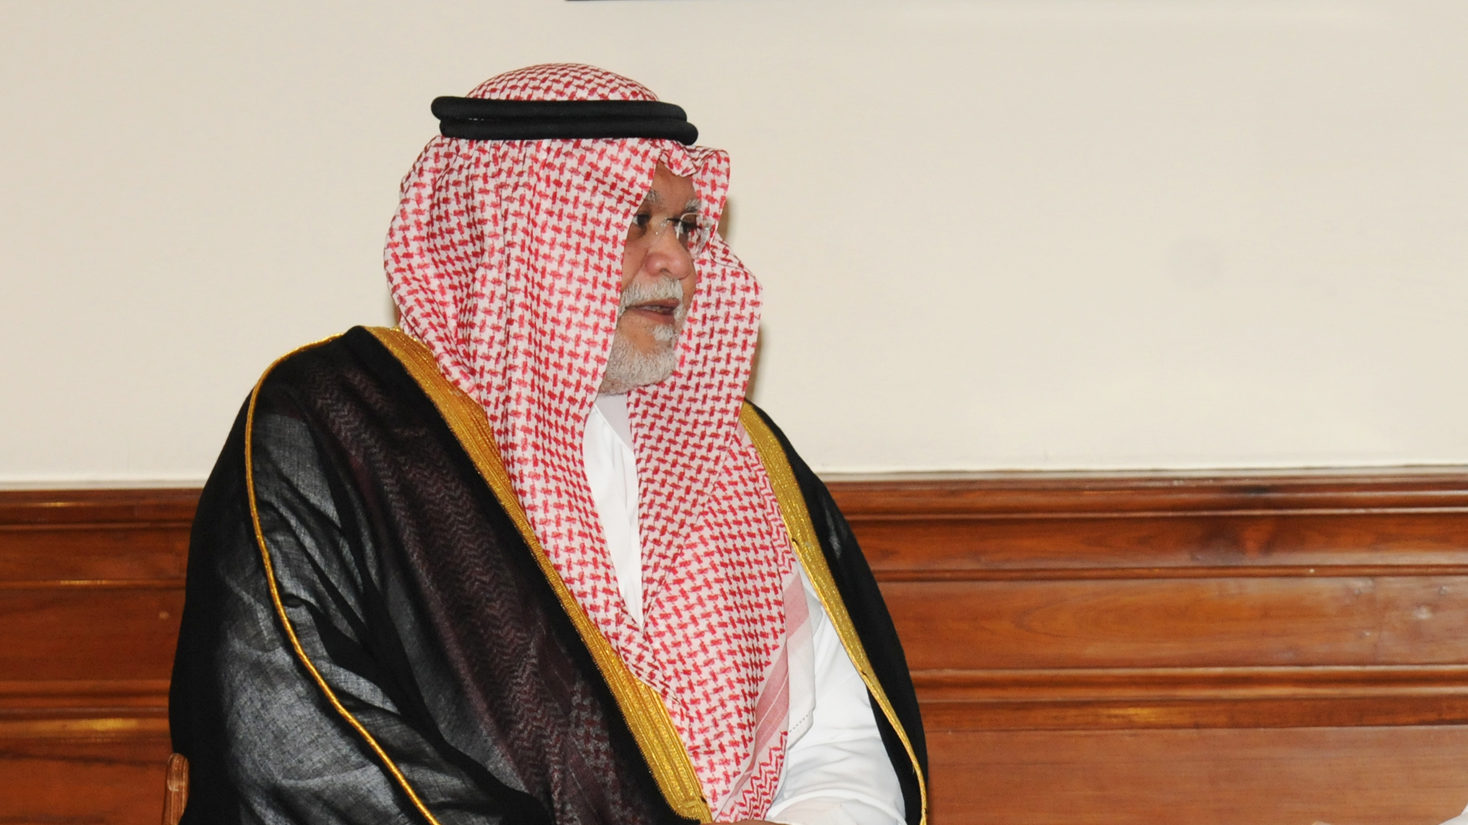 Saudi Former Top Intelligence Chief Deeply Critical of Palestinian Leadership